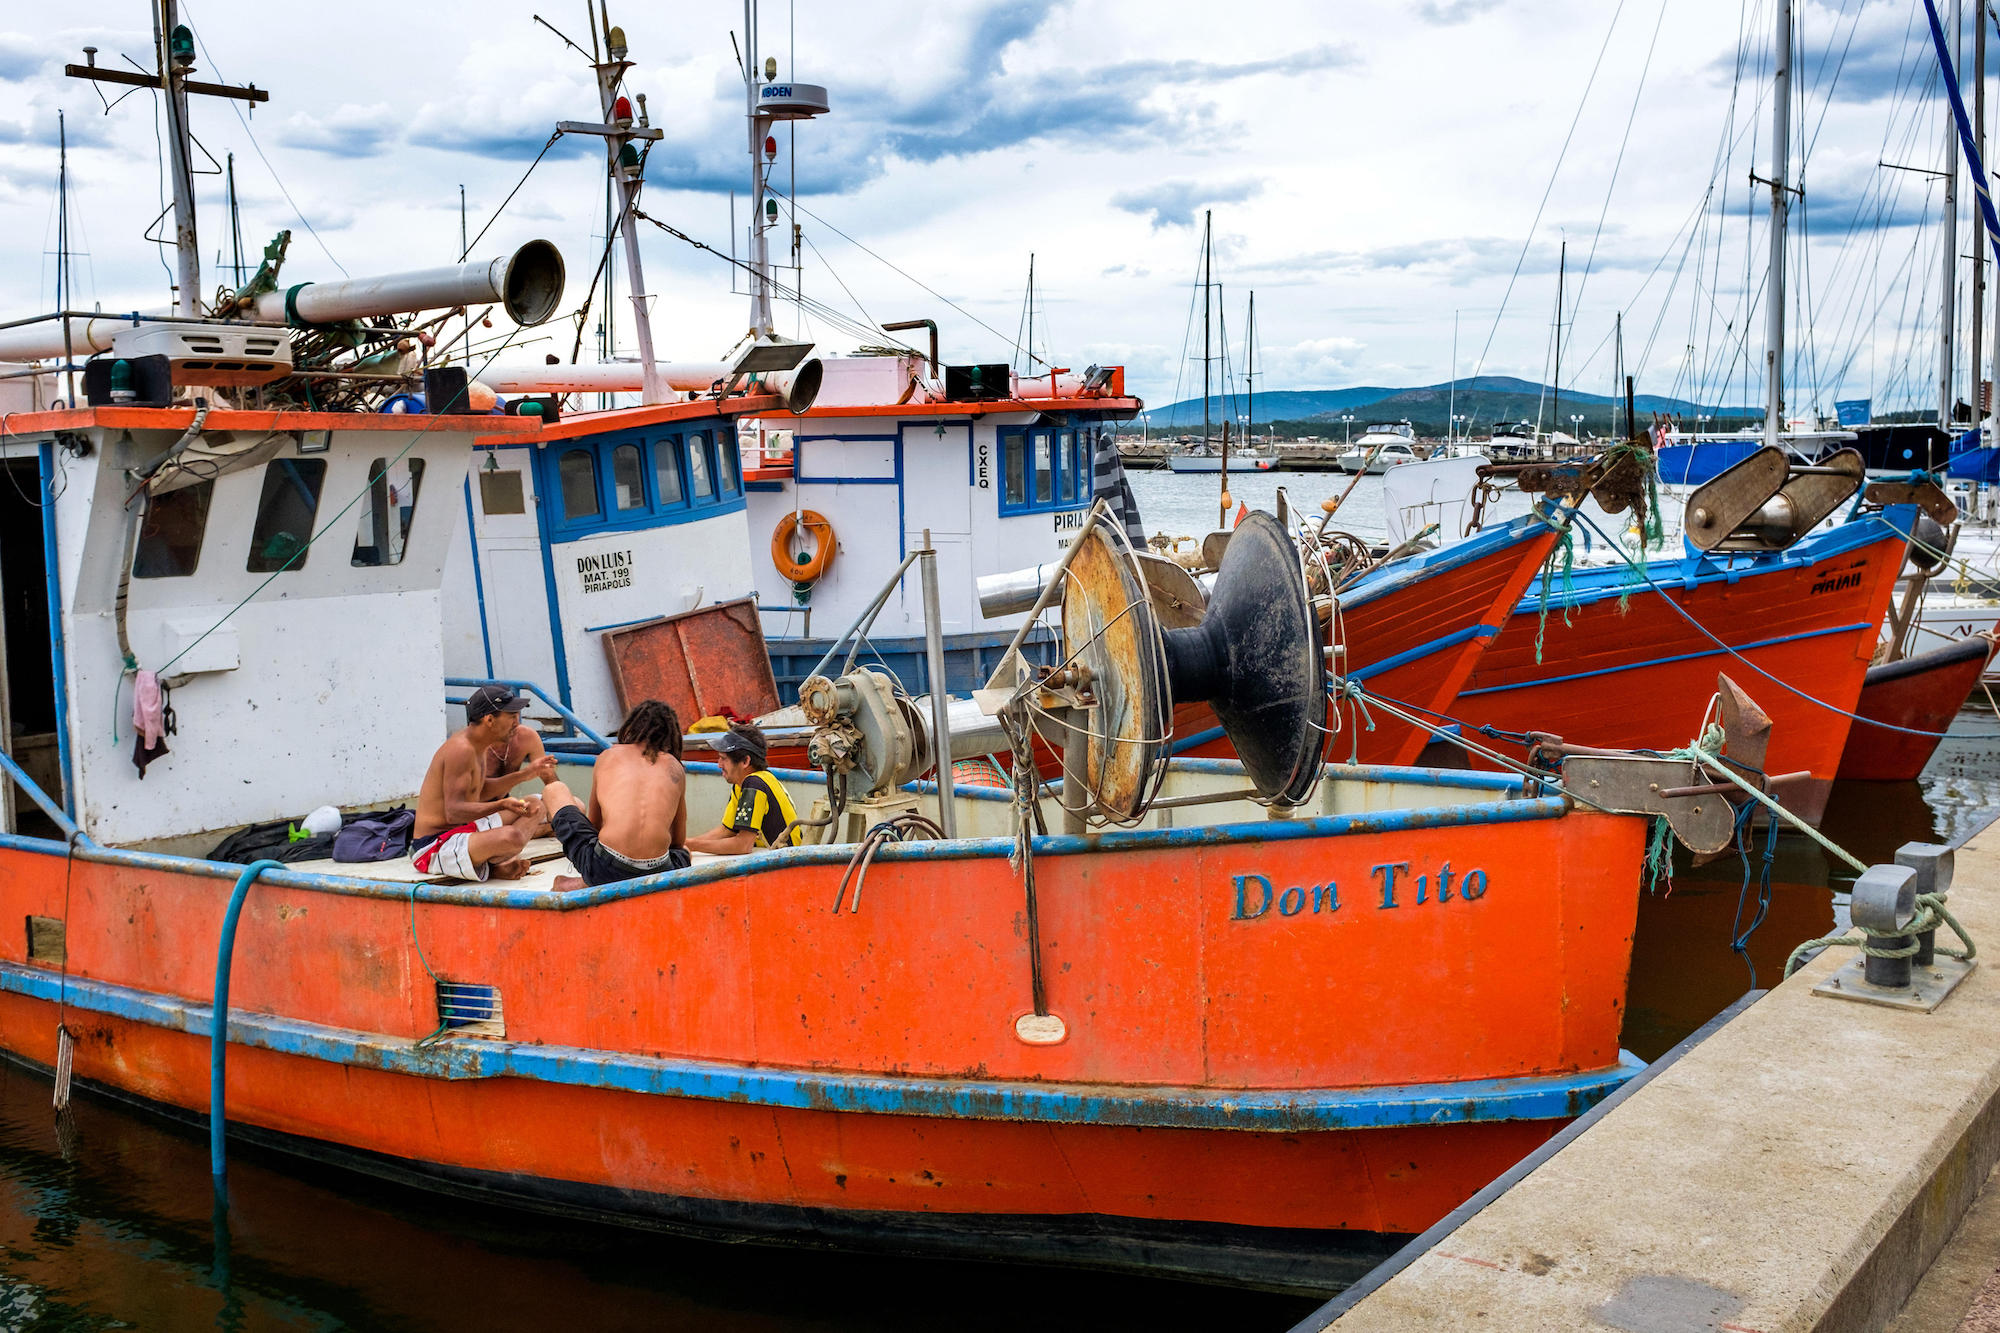 Uruguay, Piriapolis: Situated in the Maldonado Department, it?s one of the main seaside resorts in the country. Traditional fishing boats in the harbo